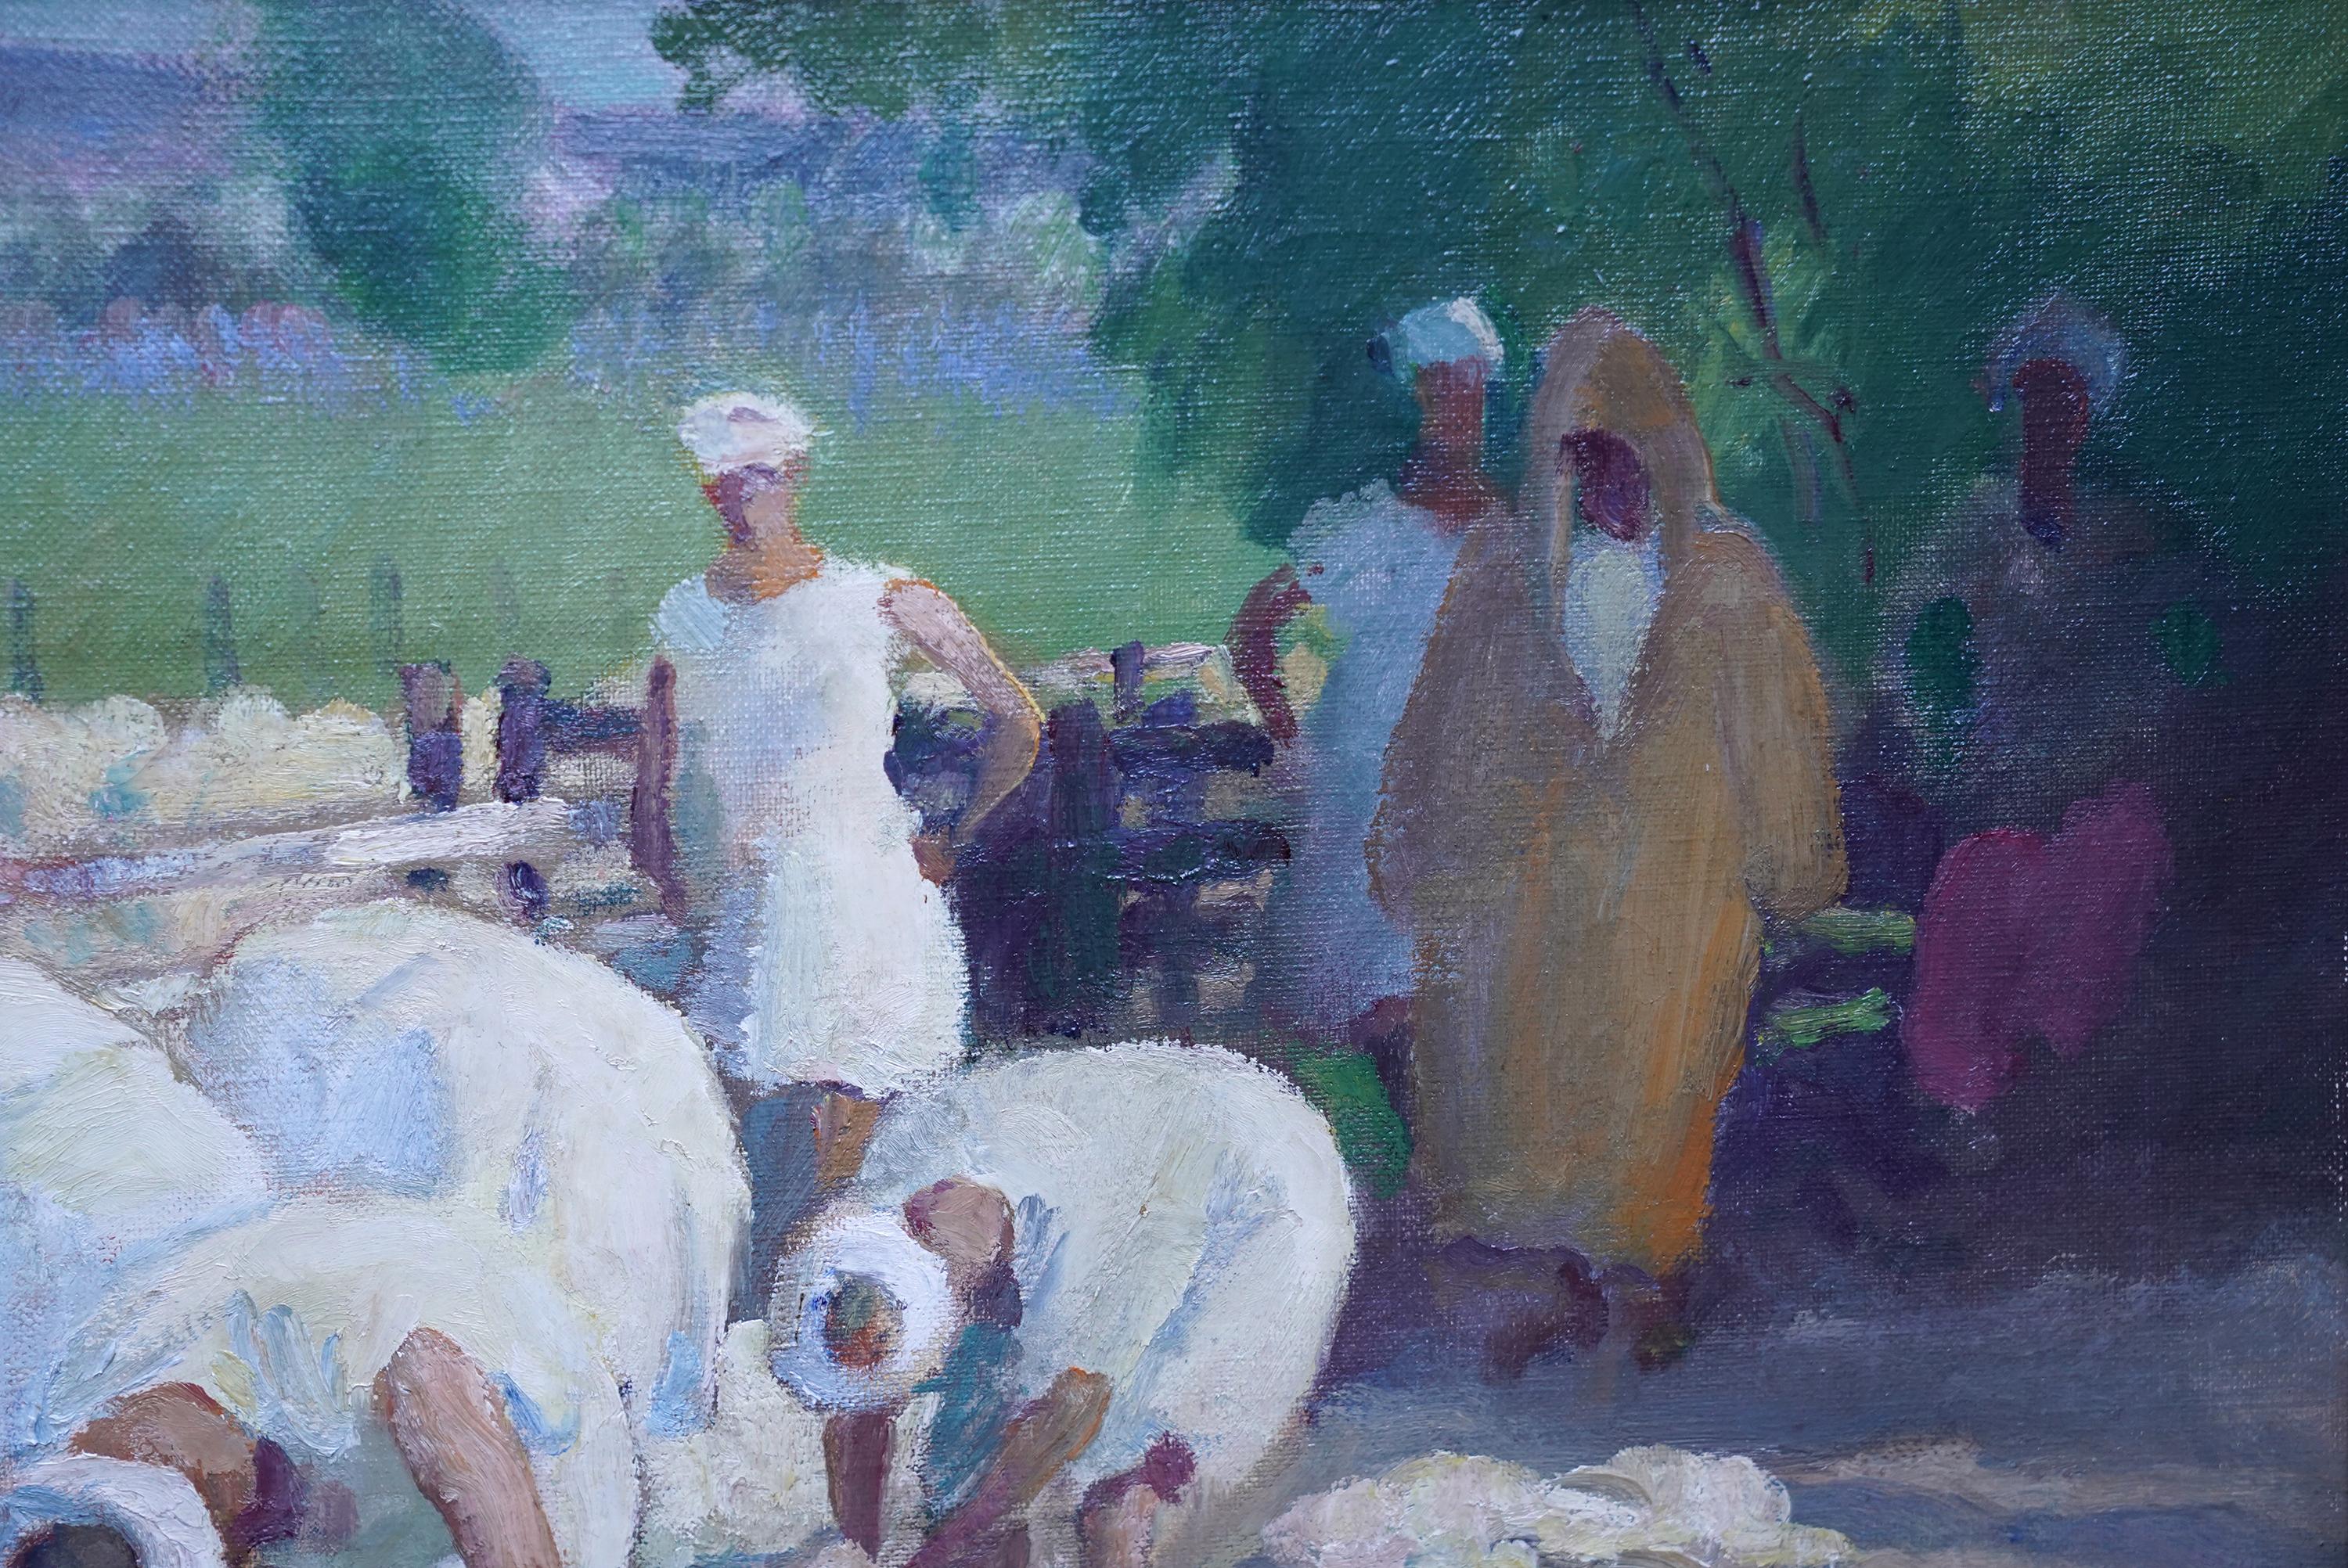 This superb vibrant Orientalist Post Impressionist oil painting is by noted British artist Gerald Spencer Pryse. It was painted about 1925 when Pryse was visiting Morocco and Northern Africa. The subject matter of the painting is a group of workers